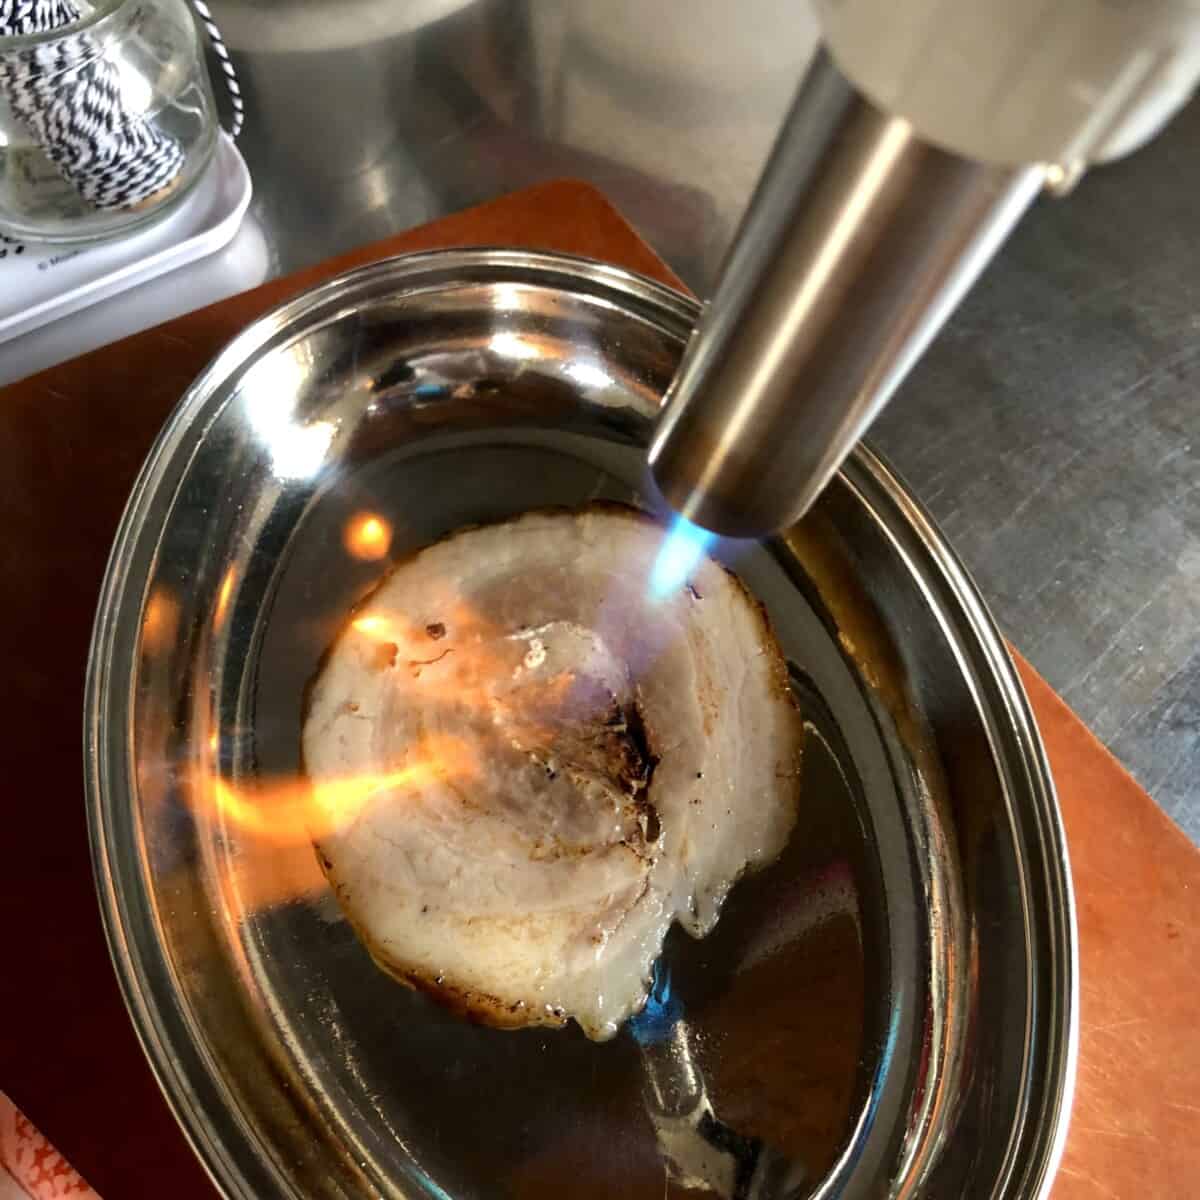 using a an Iwatani kitchen torch to sear the sliced chashu